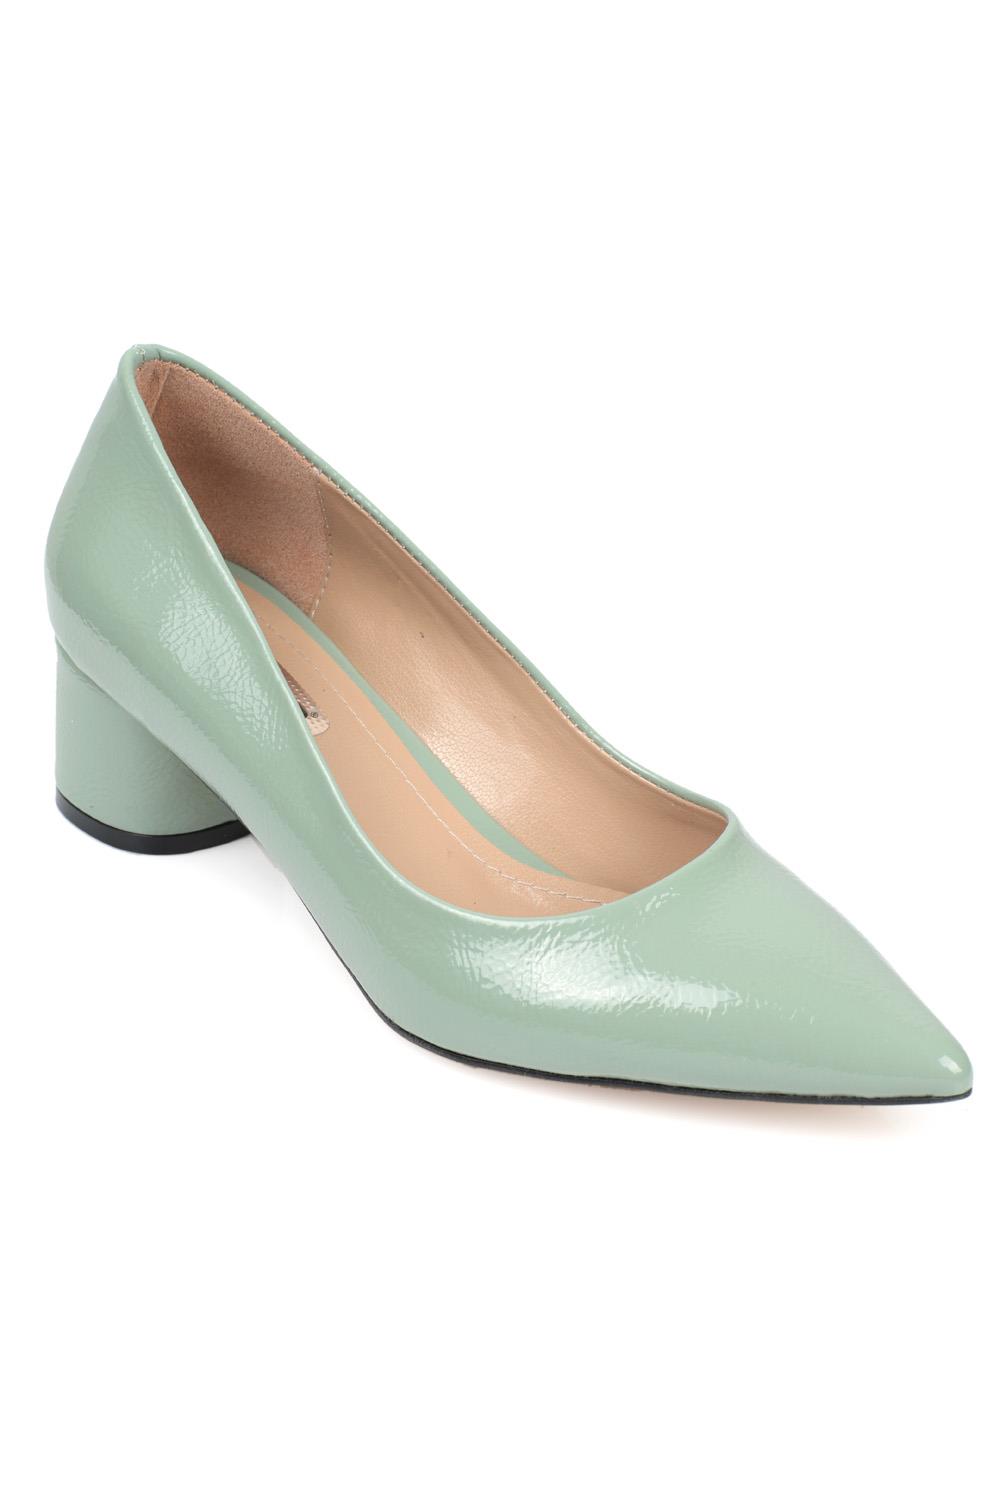 Capone Tina Mid Heel Women Mint Green Shoes | caponeoutfitters.com